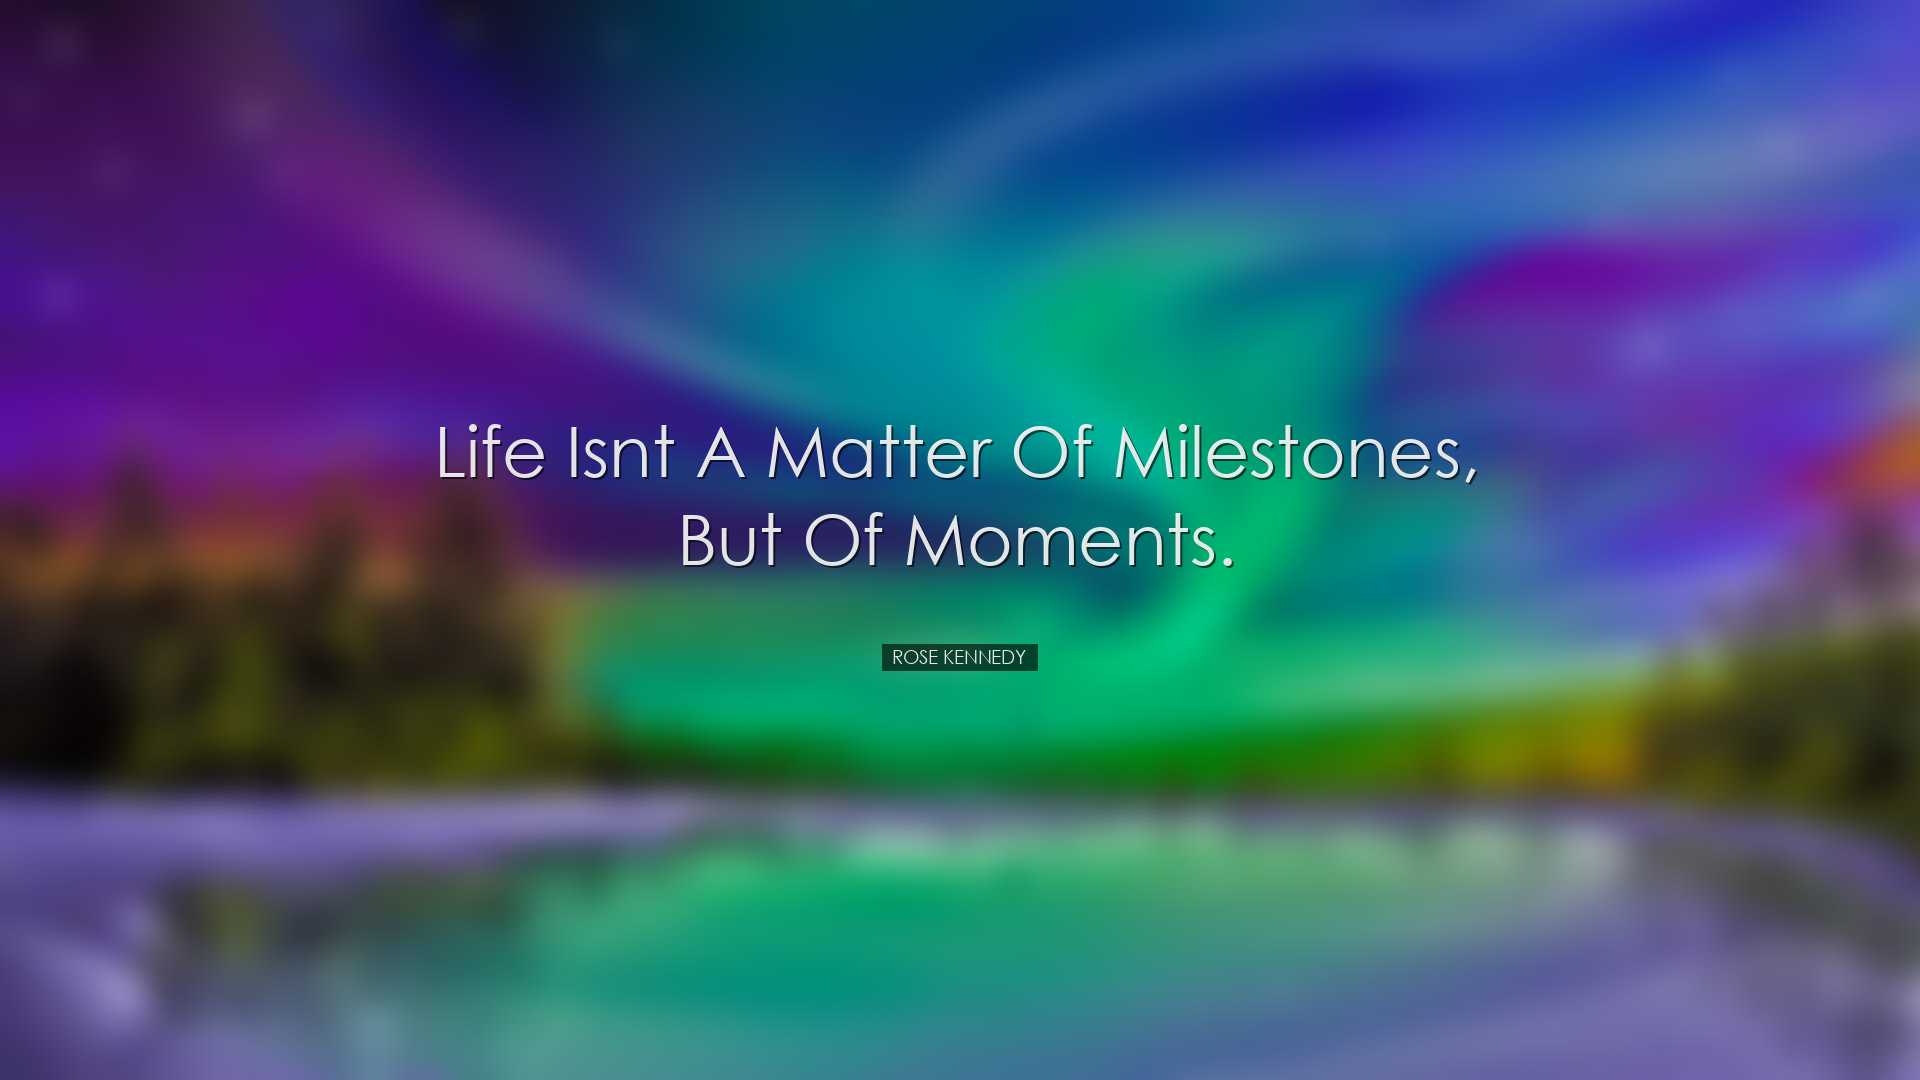 Life isnt a matter of milestones, but of moments. - Rose Kennedy